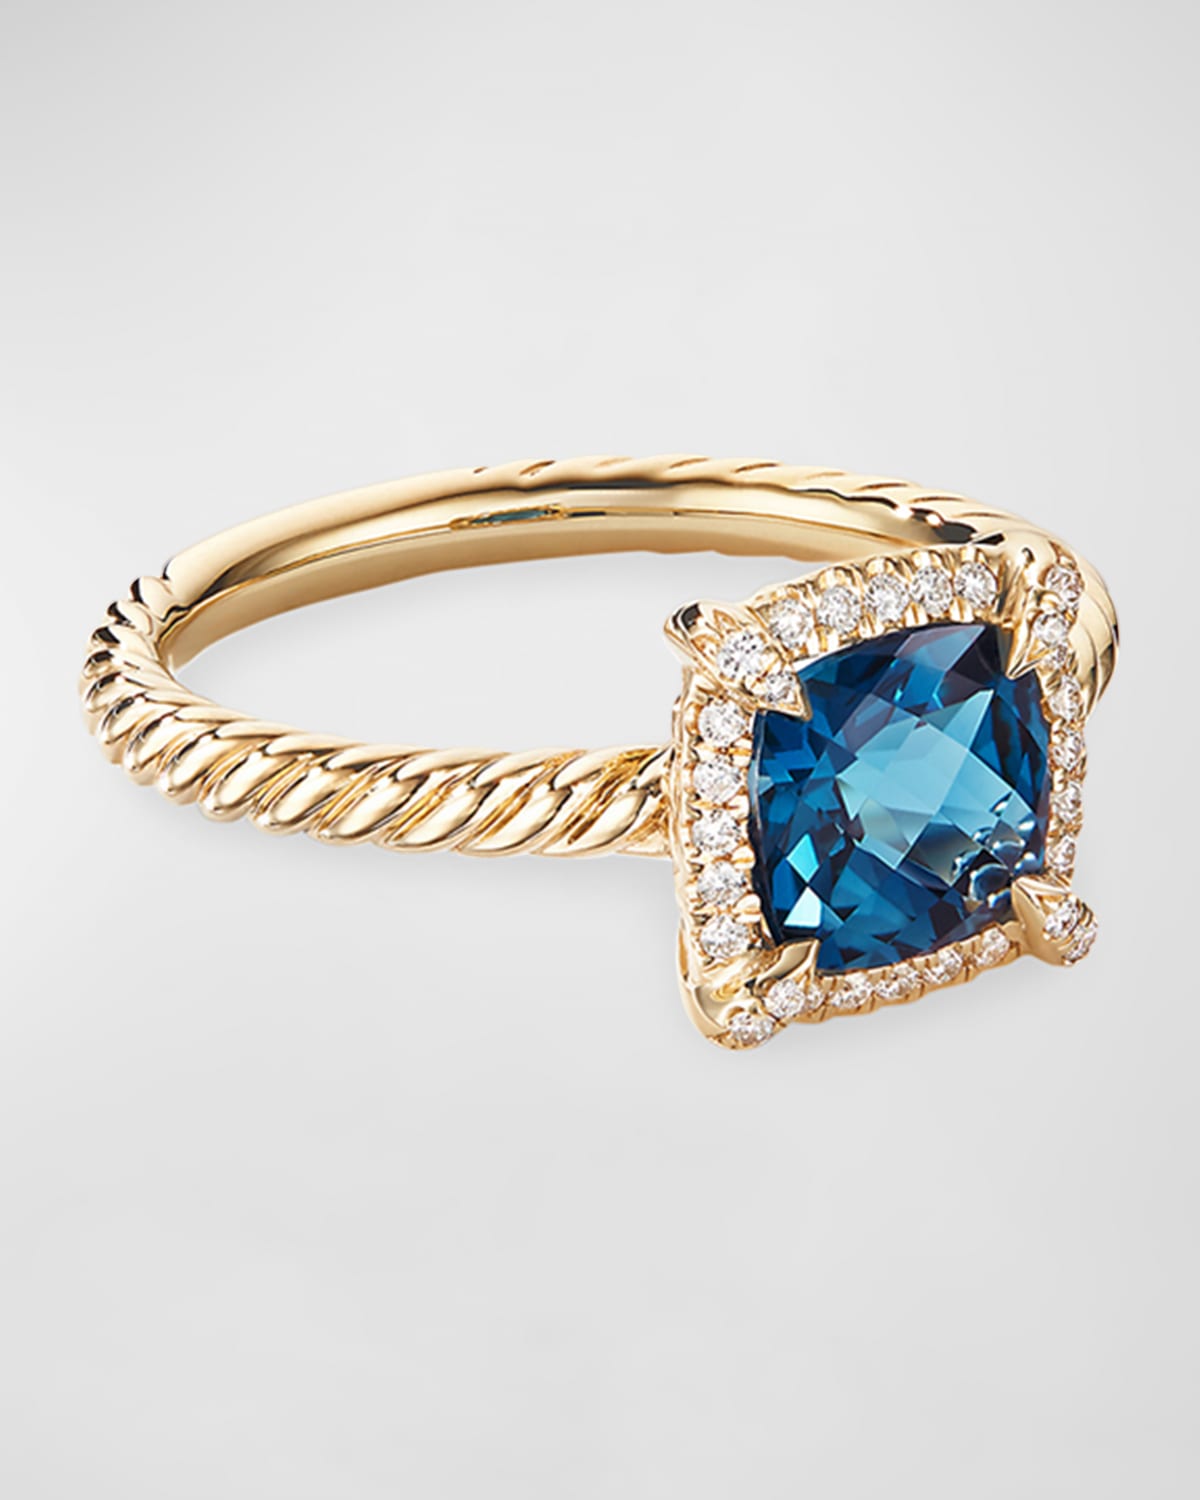 Shop David Yurman Petite Chatelaine Pave Bezel Ring In 18k Gold With Blue Topaz In 15 Blue